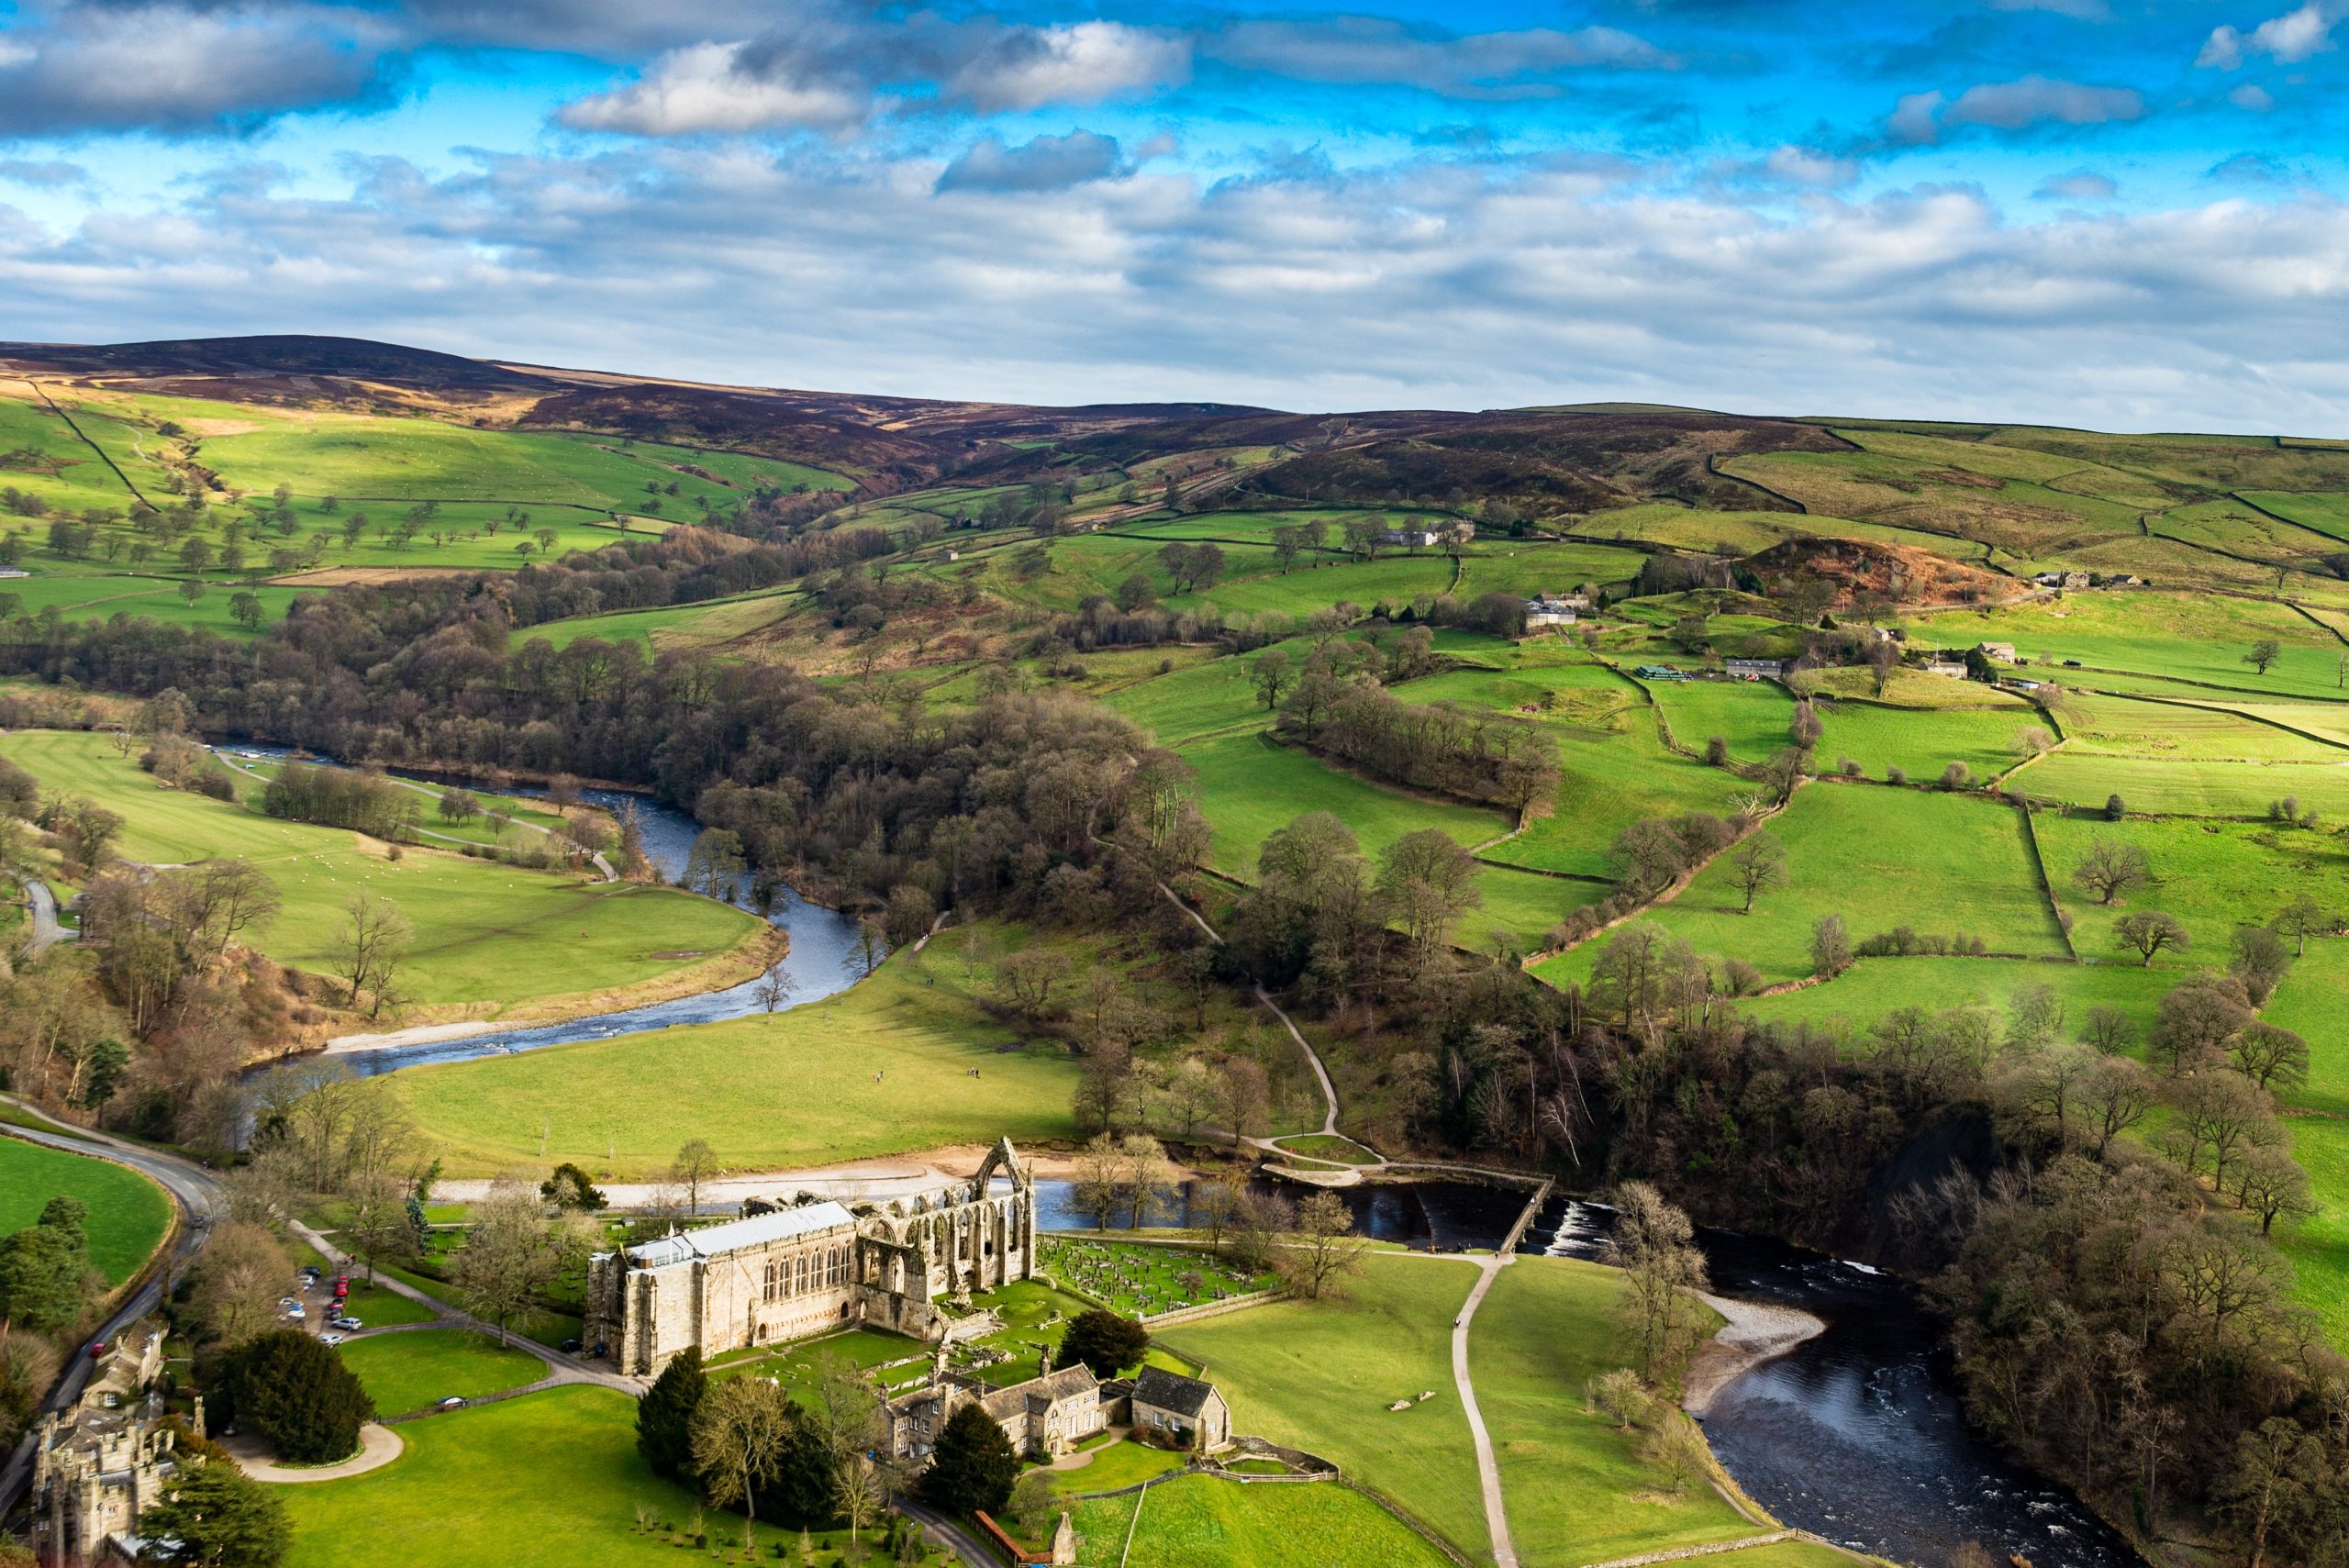 Things to do in Skipton - Bolton Abbey